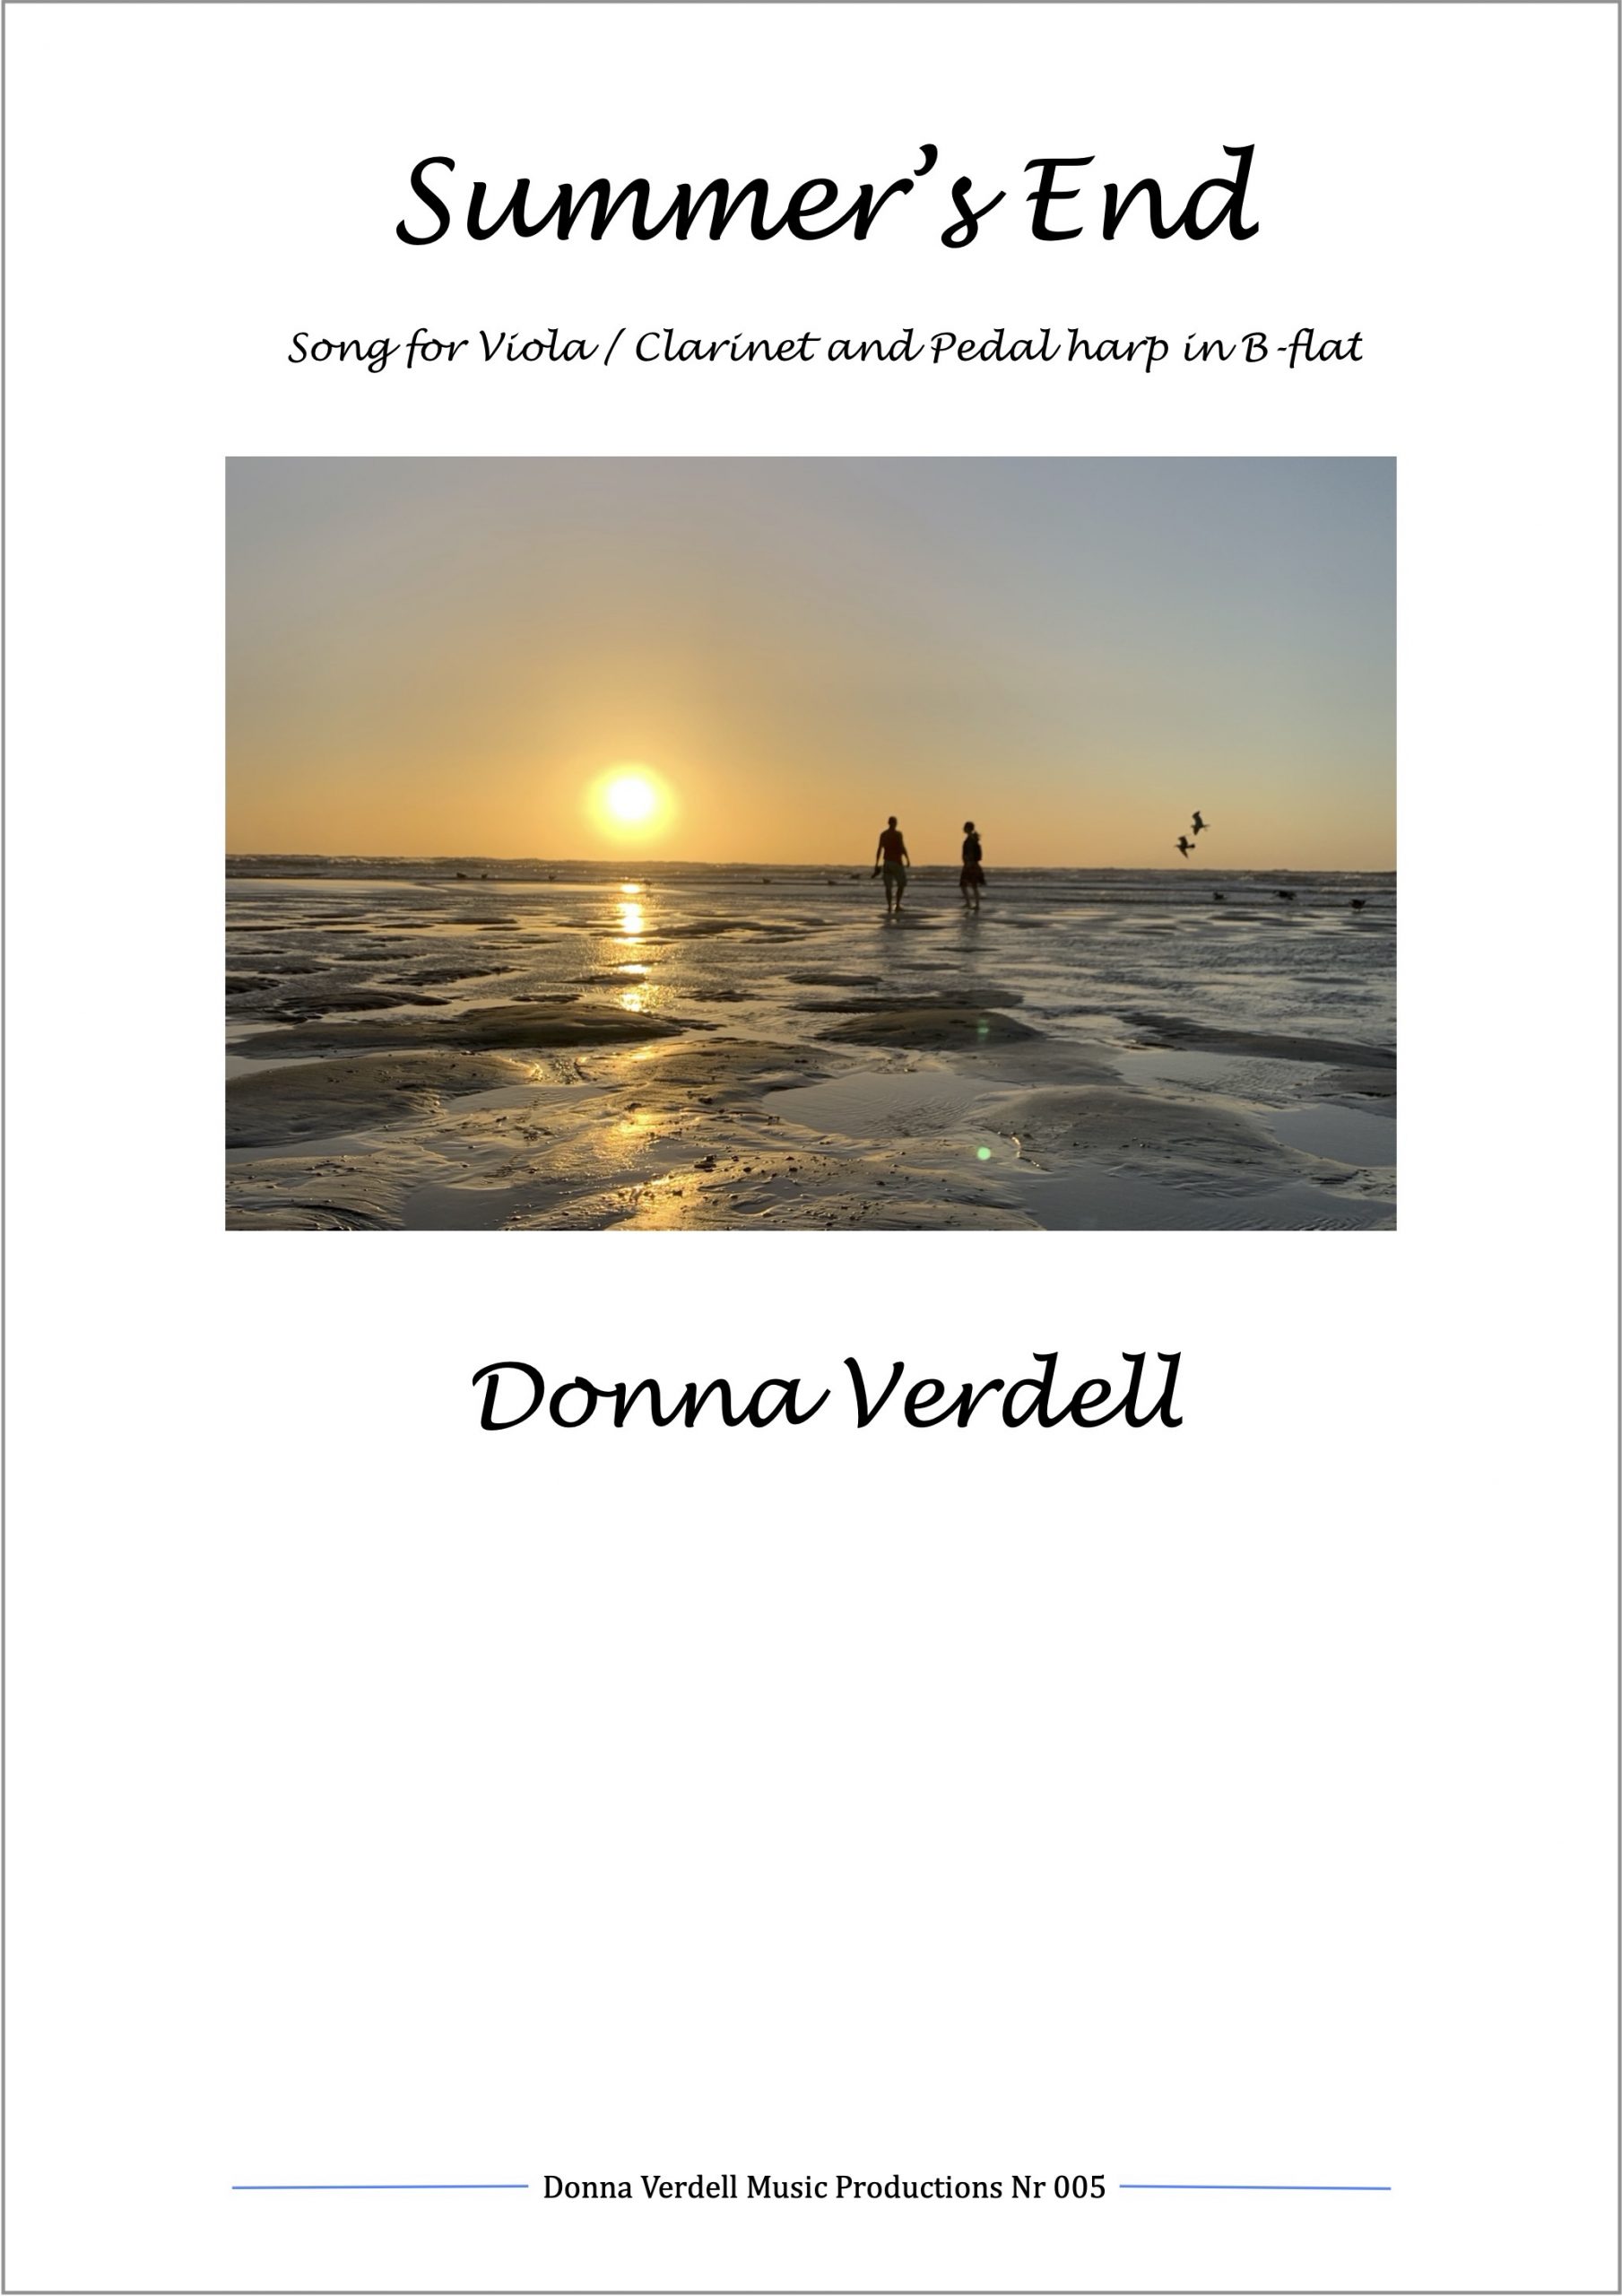 Voorkant Song for Viola : Bes Clarinet and Pedal Harp in B-flat (Summer's End) - Donna Verdell kopie